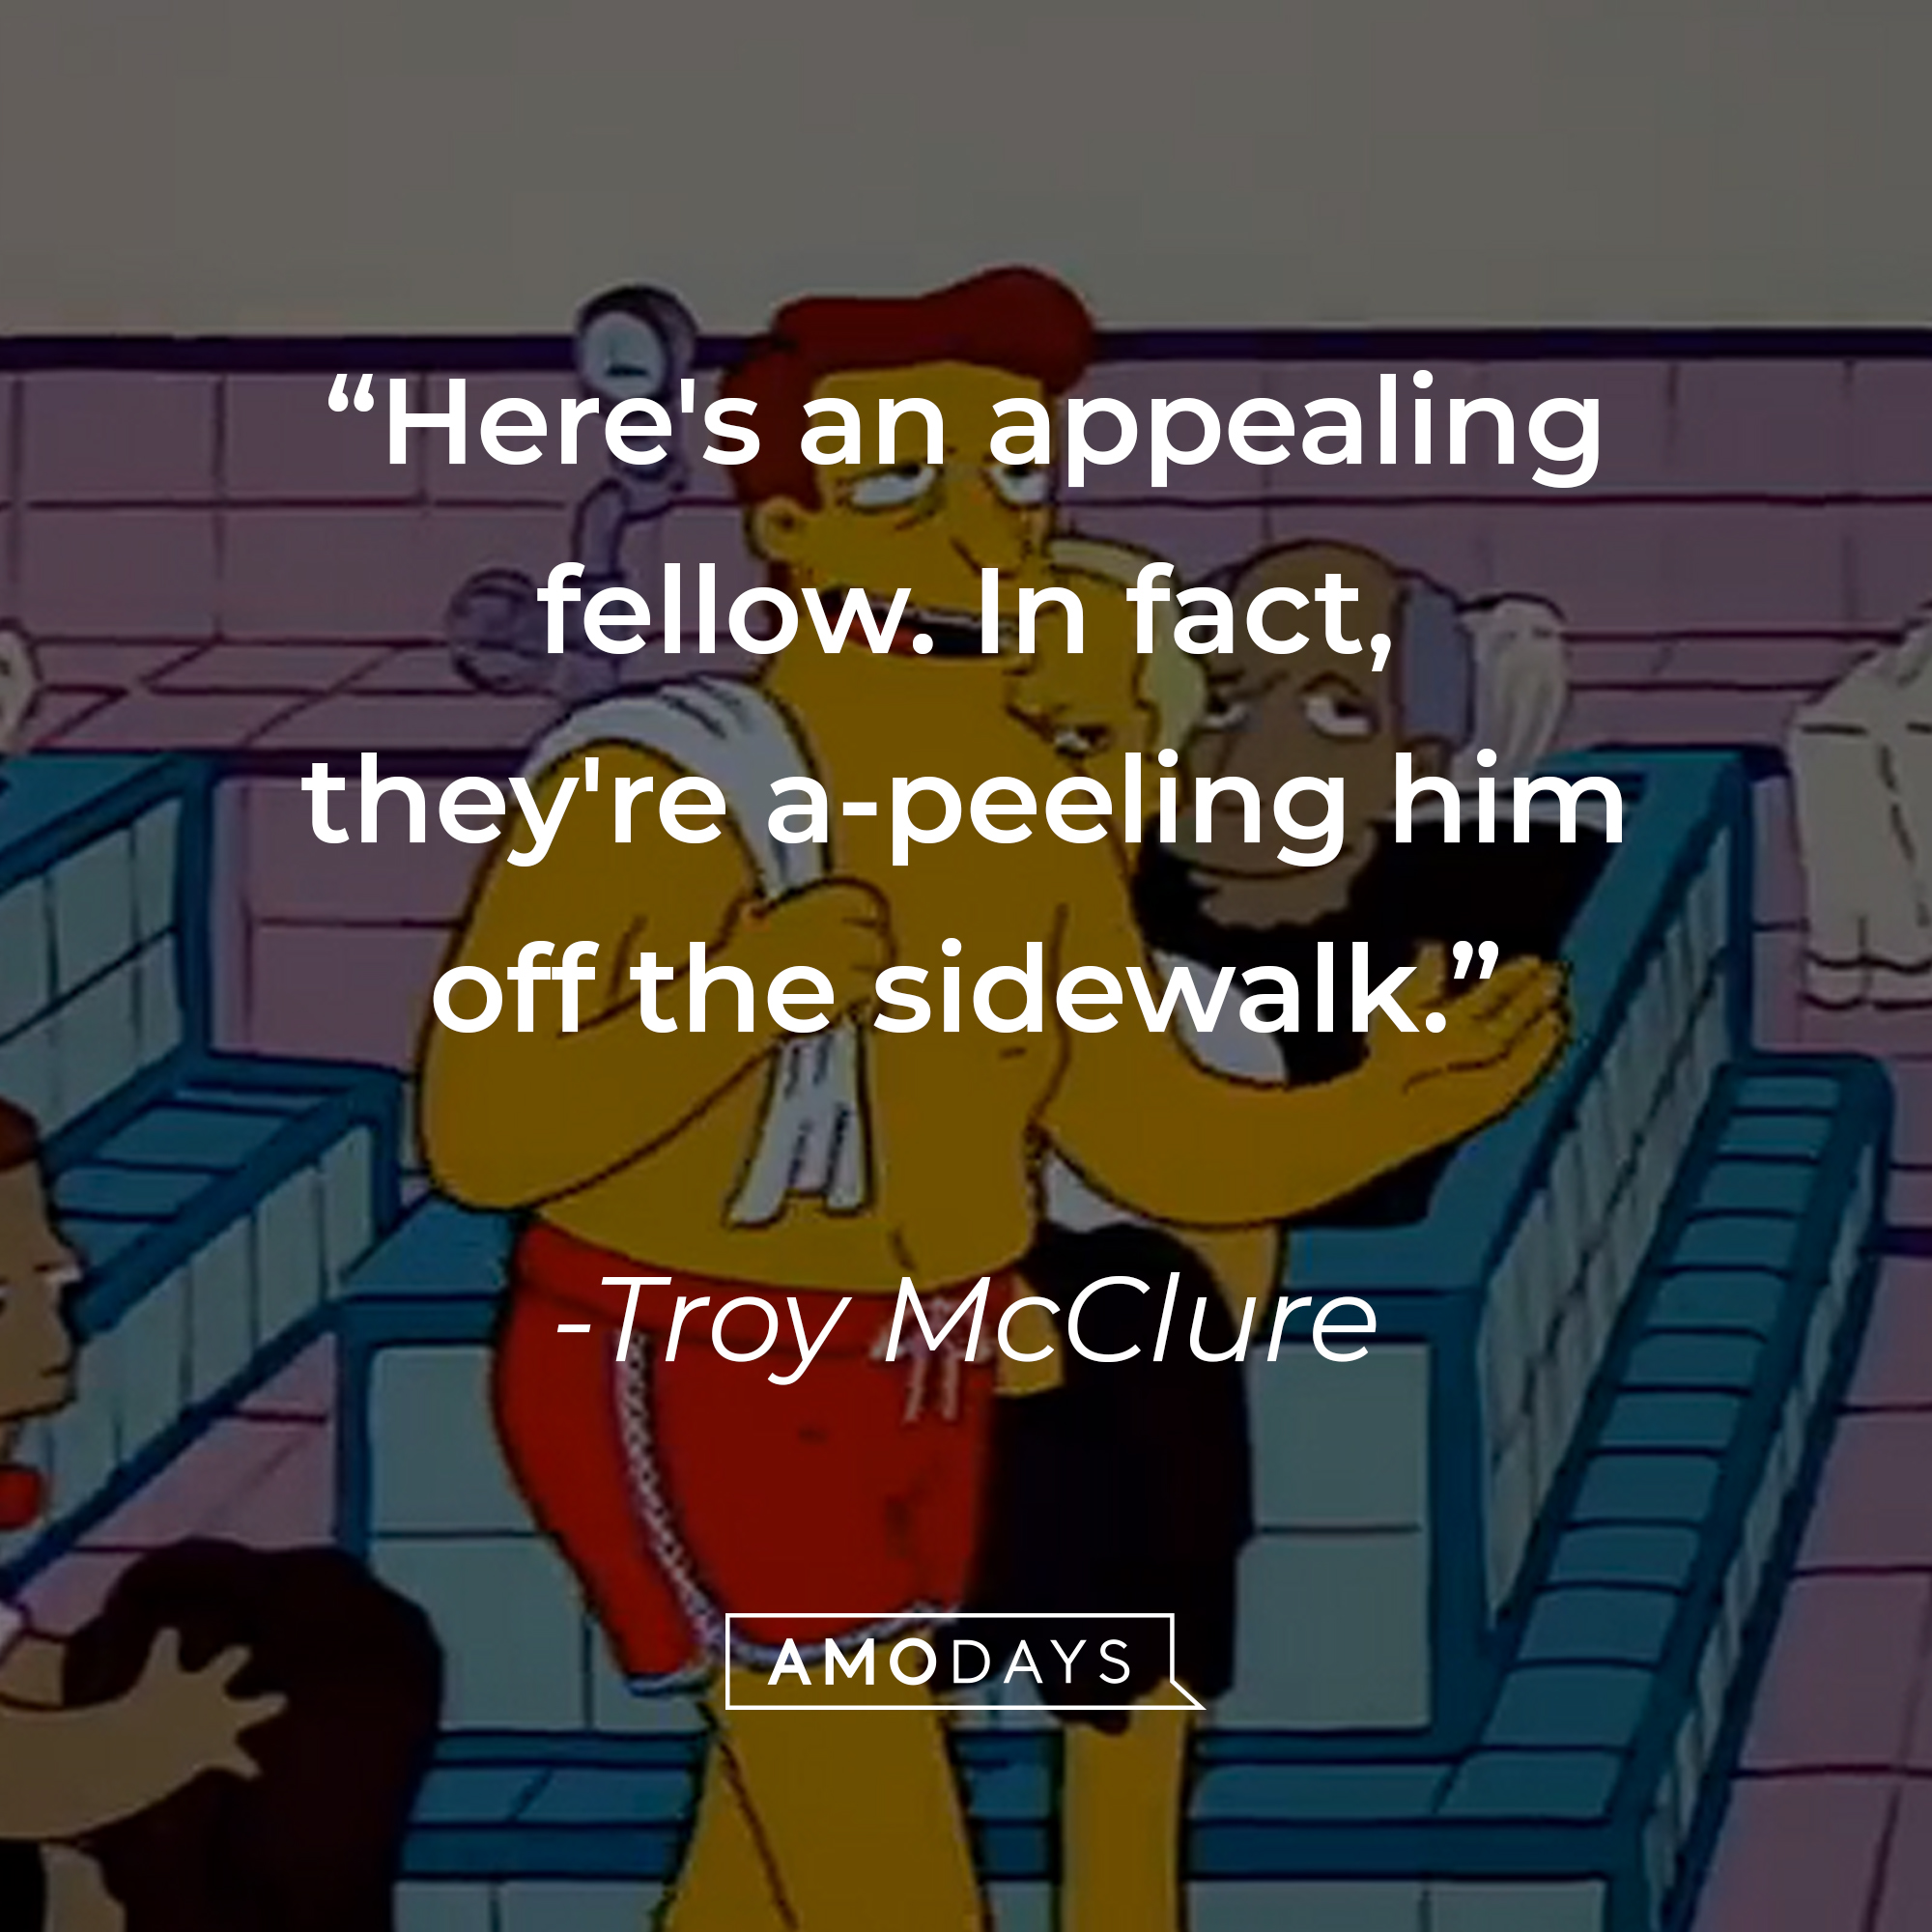 Troy McClure, with his quote: “Here's an appealing fellow. In fact, they're a-peeling him off the sidewalk.” | Source: facebook.com/TheSimpsons